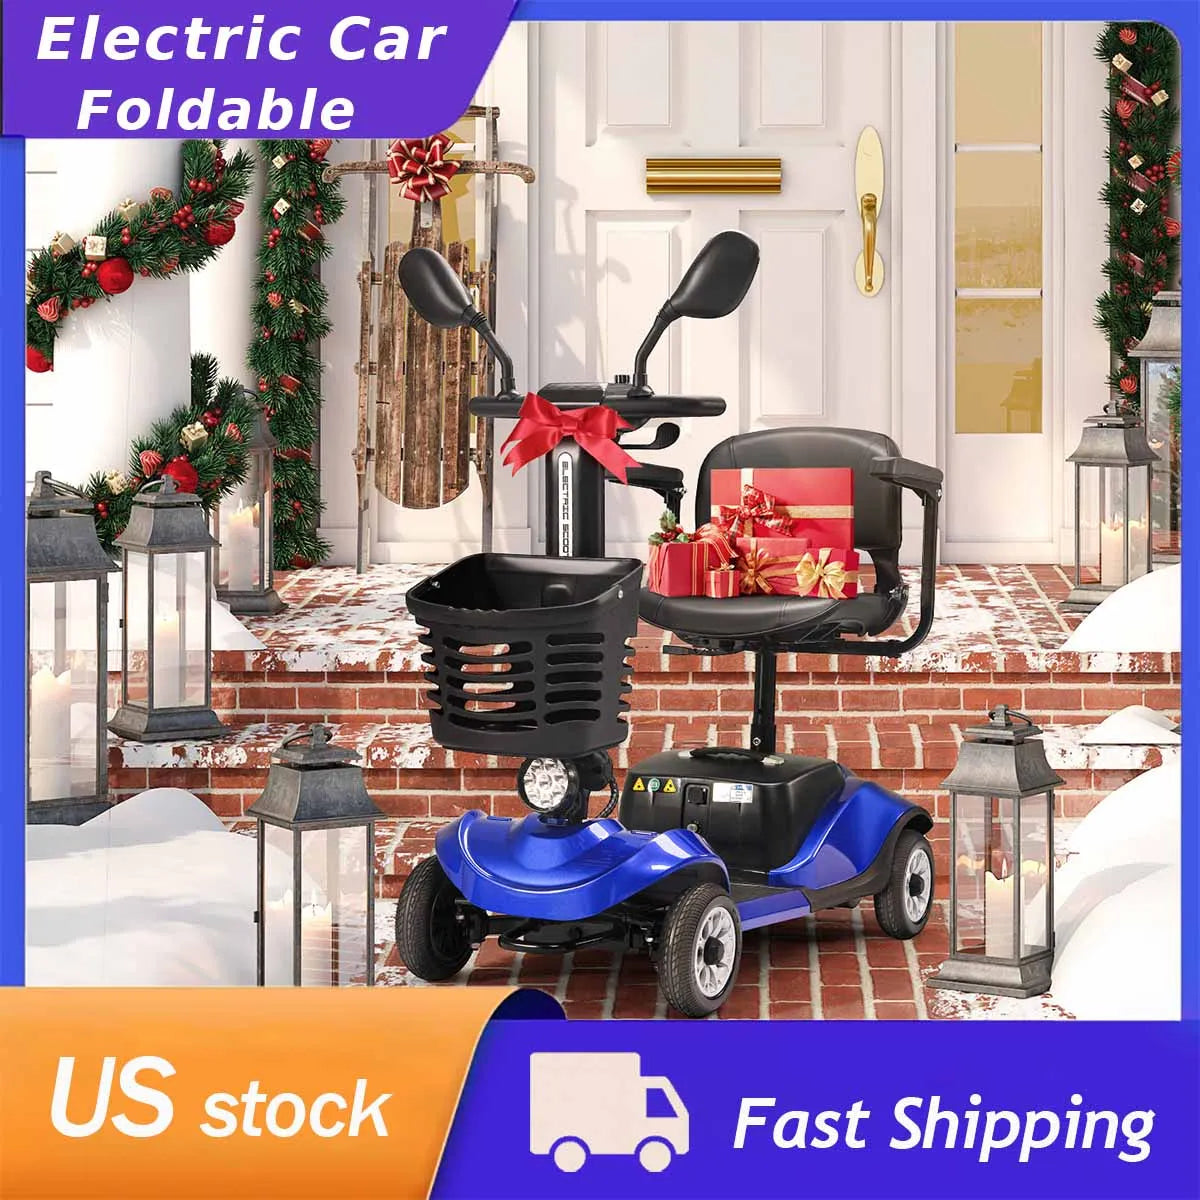 Mobile Wheelchair for Seniors Elderly Folding Compact Travel Scooter with Basket